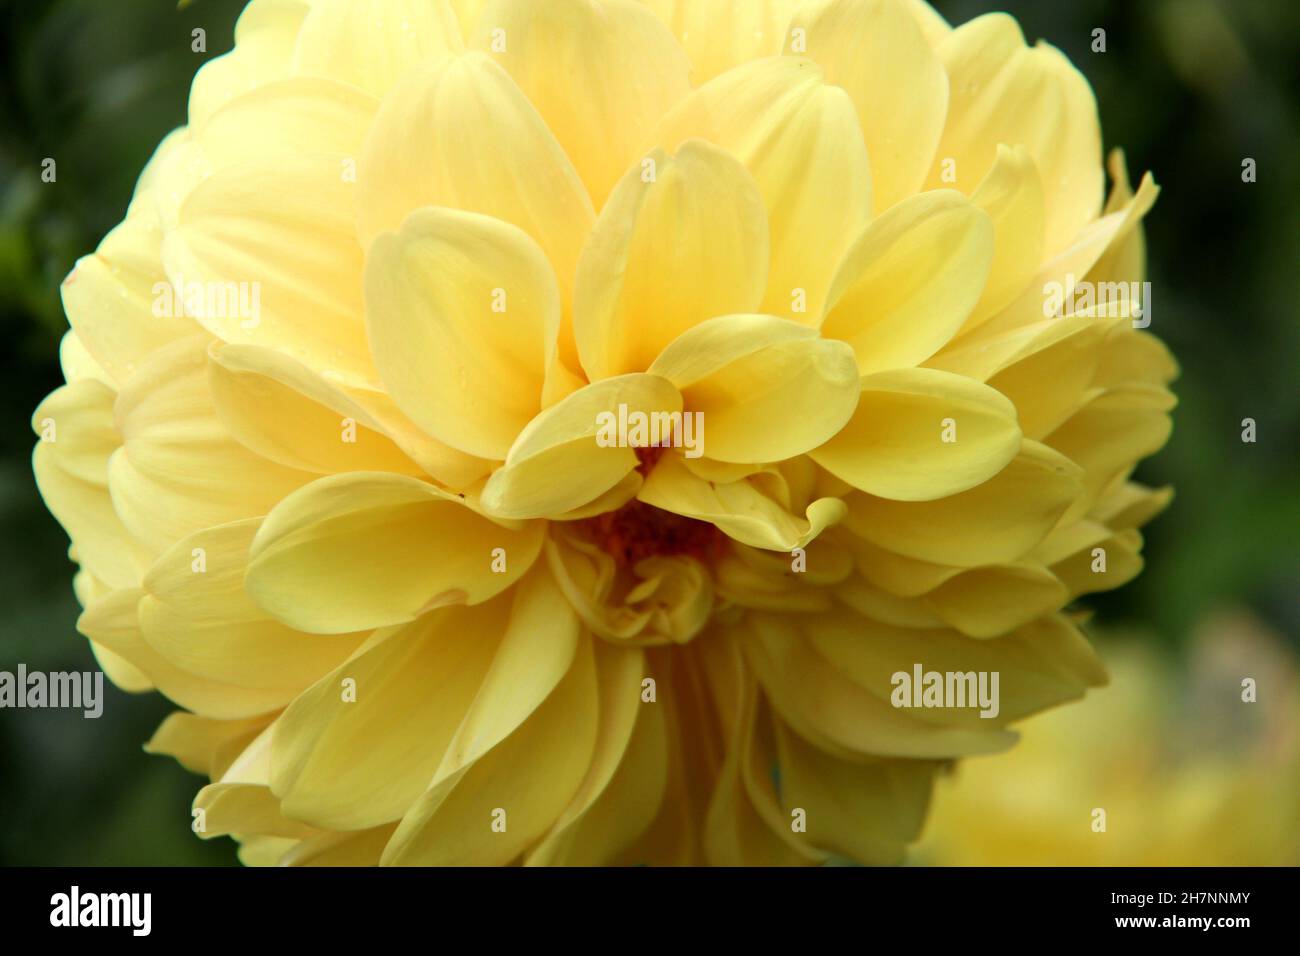 Dahlia, or Dalia or Perennial: Close-up of a yellow flower in a garden. It is a botanical genus belonging to the Asteraceae family. It's an herbaceous. Stock Photo